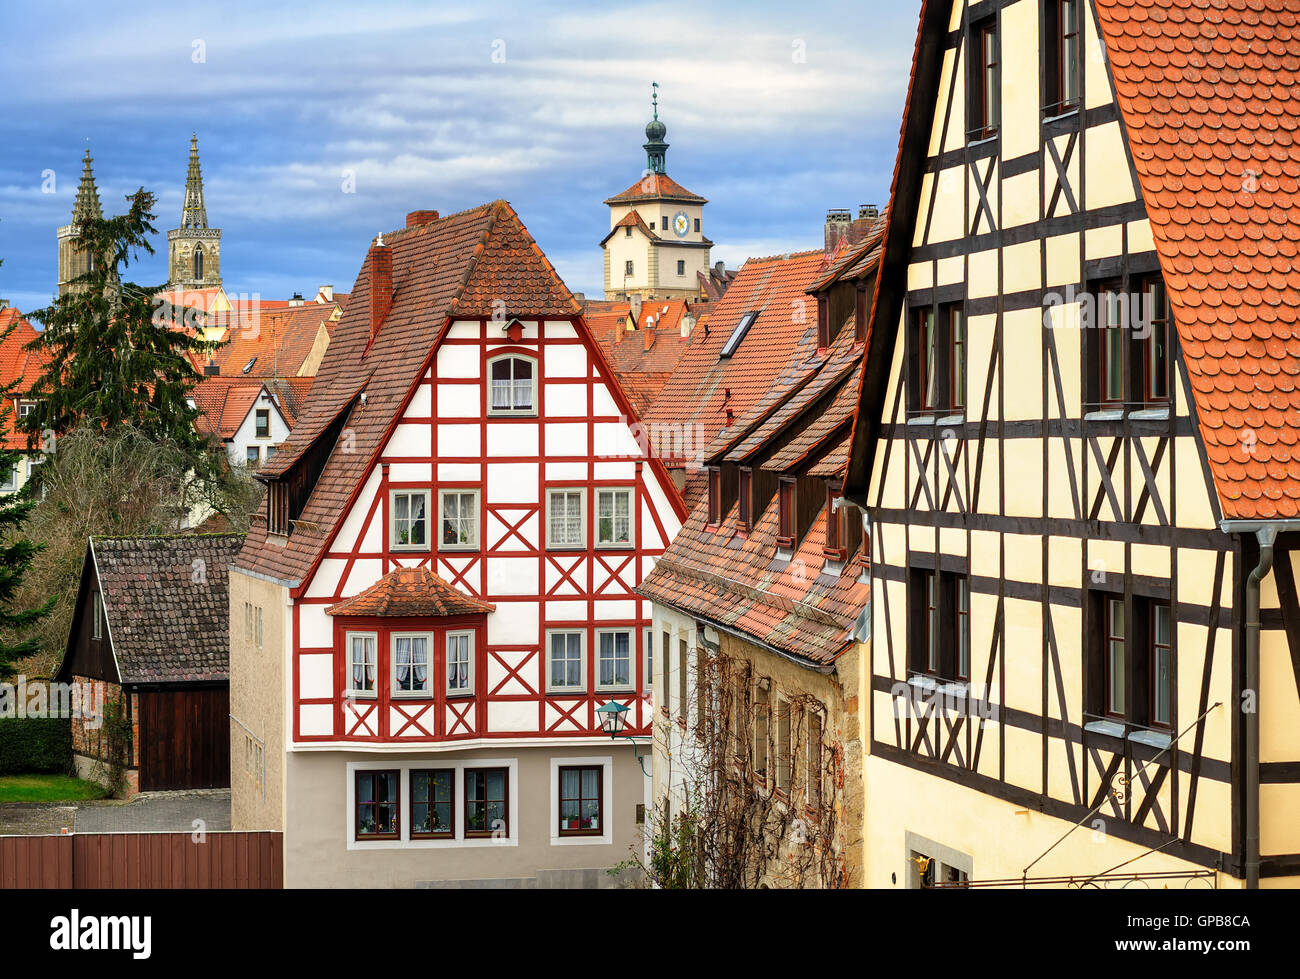 Traditional red tile roofs and half-timbered houses in Rothenburg ob der Tauber, Germany Stock Photo